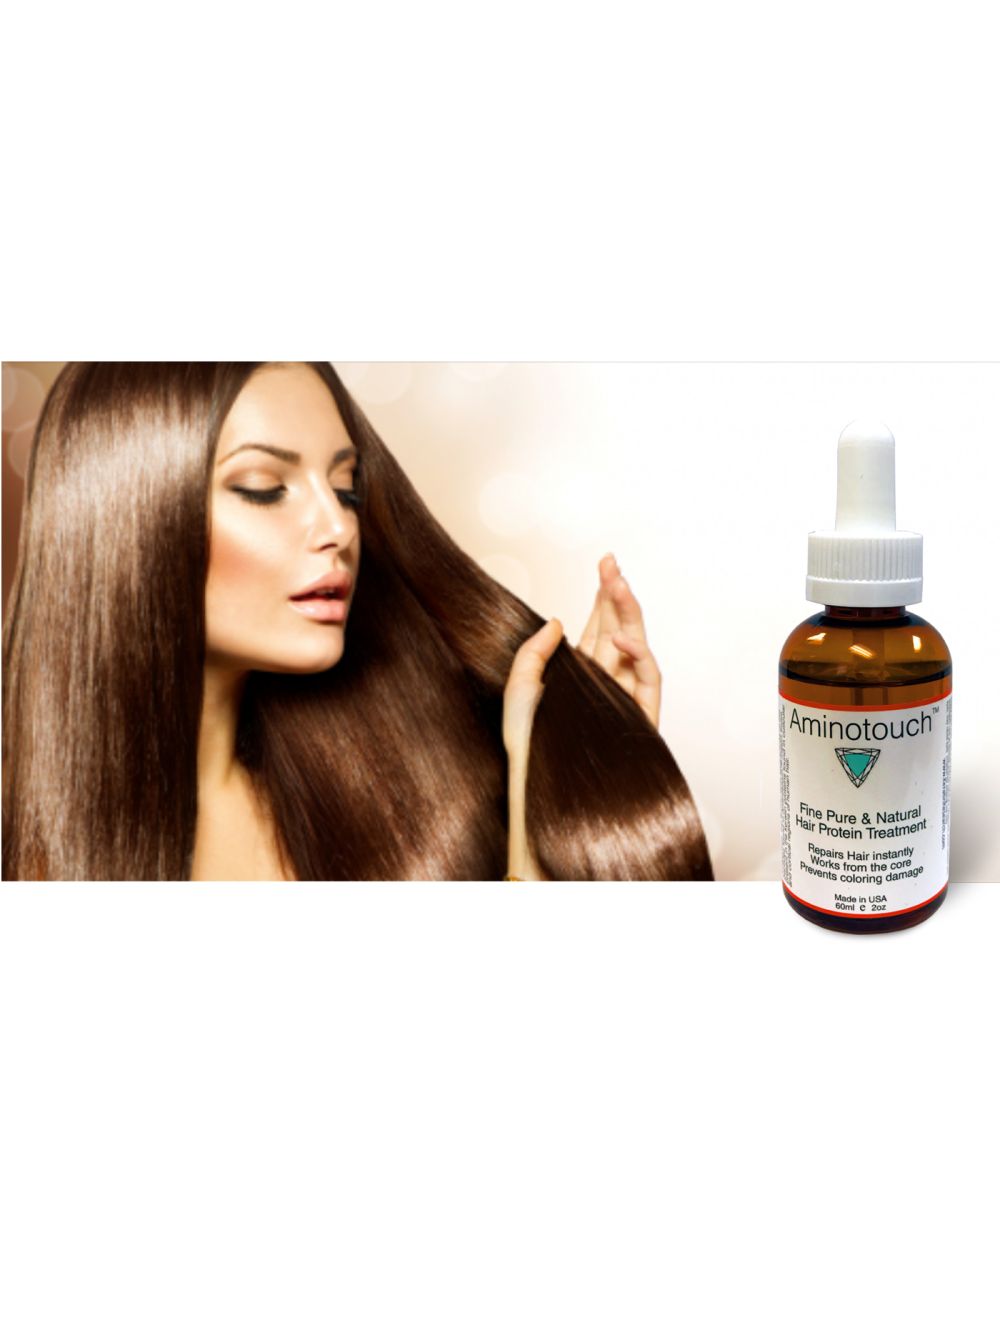 Hair Filler & Protein Treatment To Control Frizzy, Curly Hair, Repaires  New!!